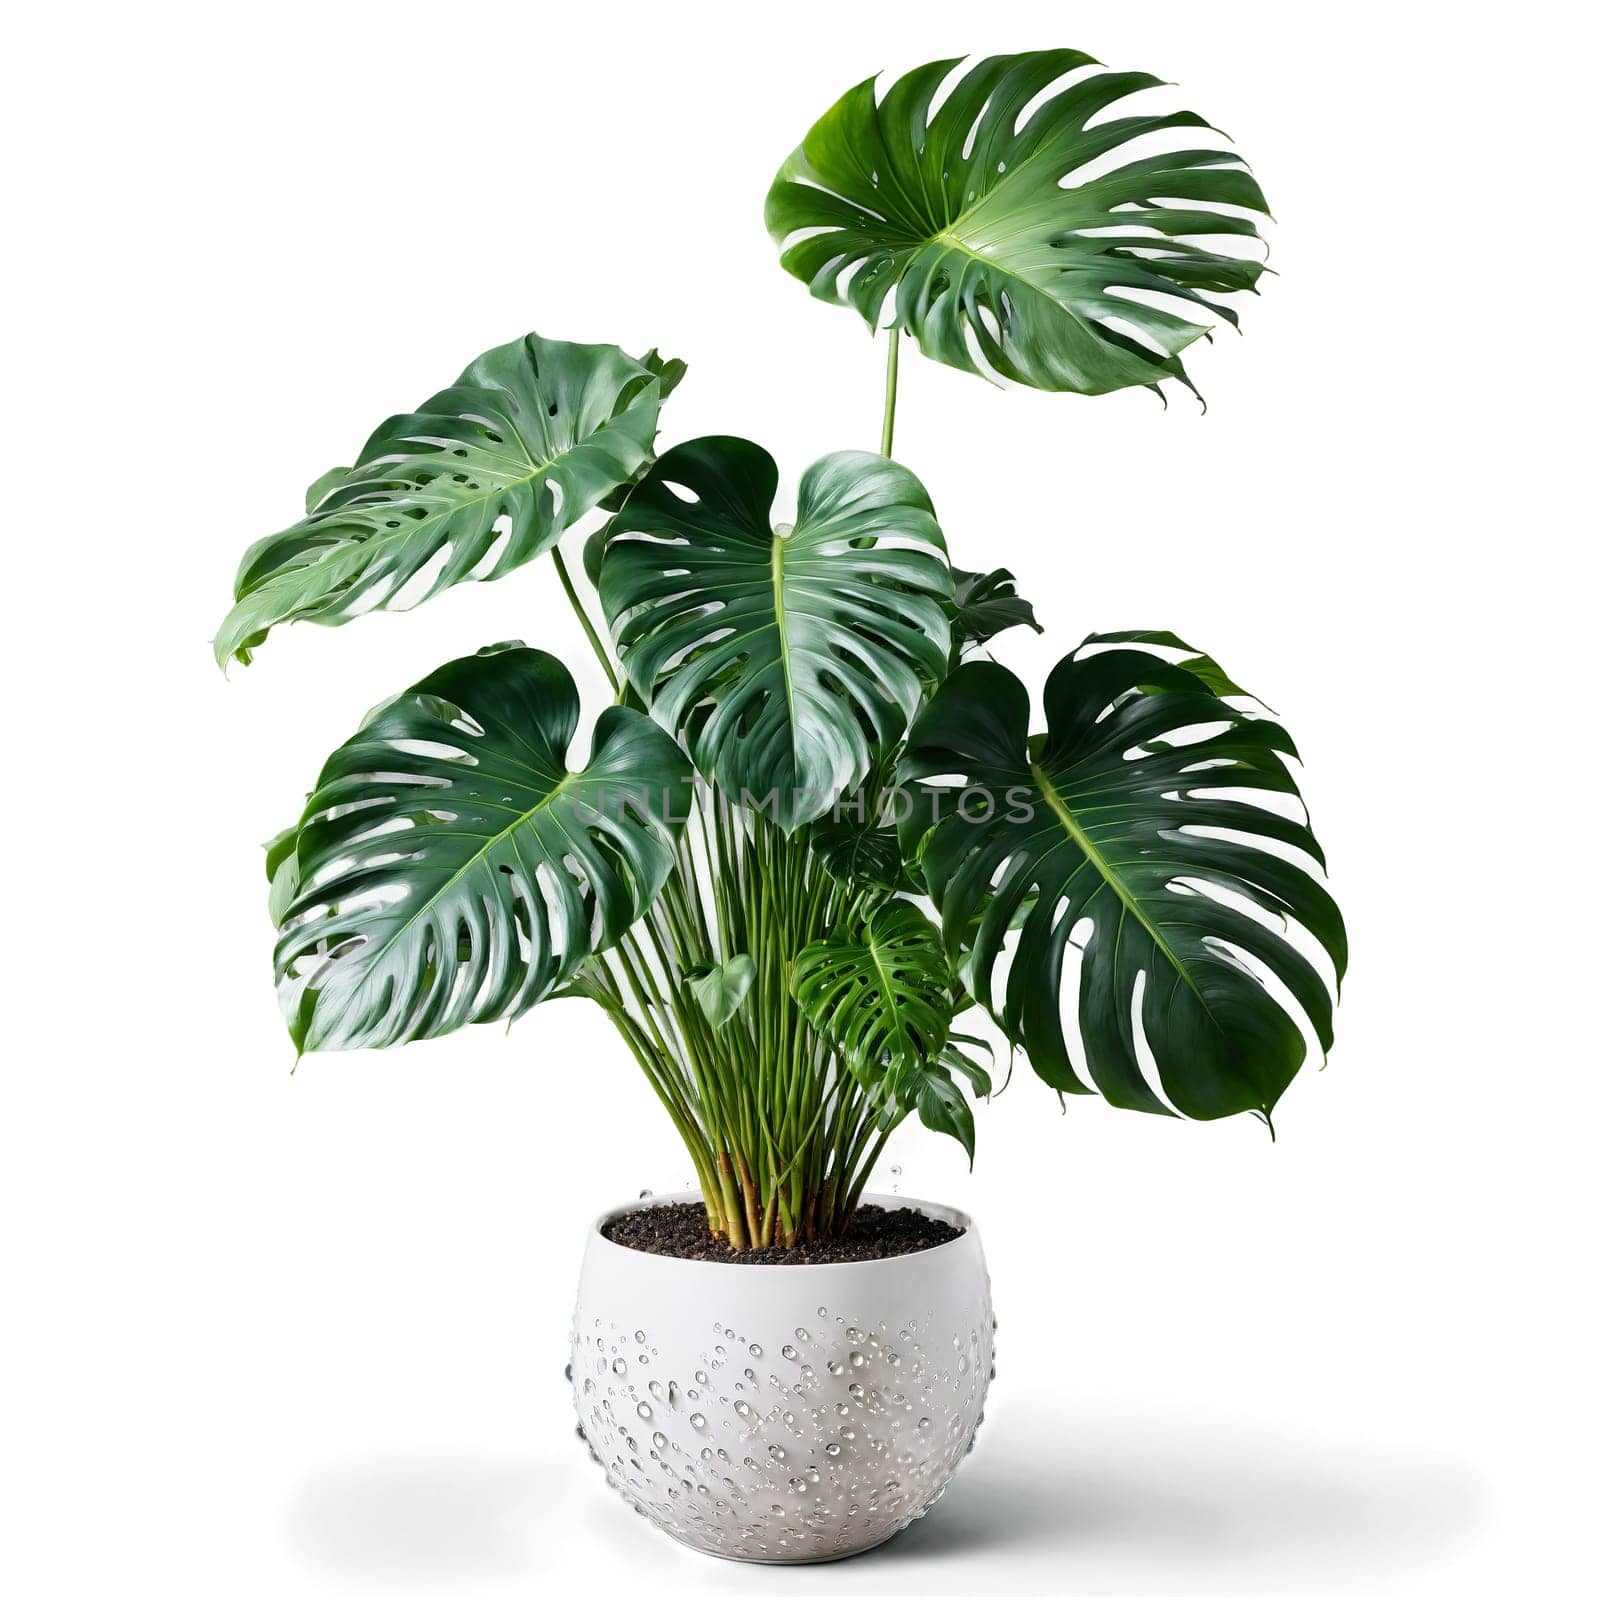 Monstera Deliciosa large green split leaves unfurling from a hovering woven planter with a misty by panophotograph